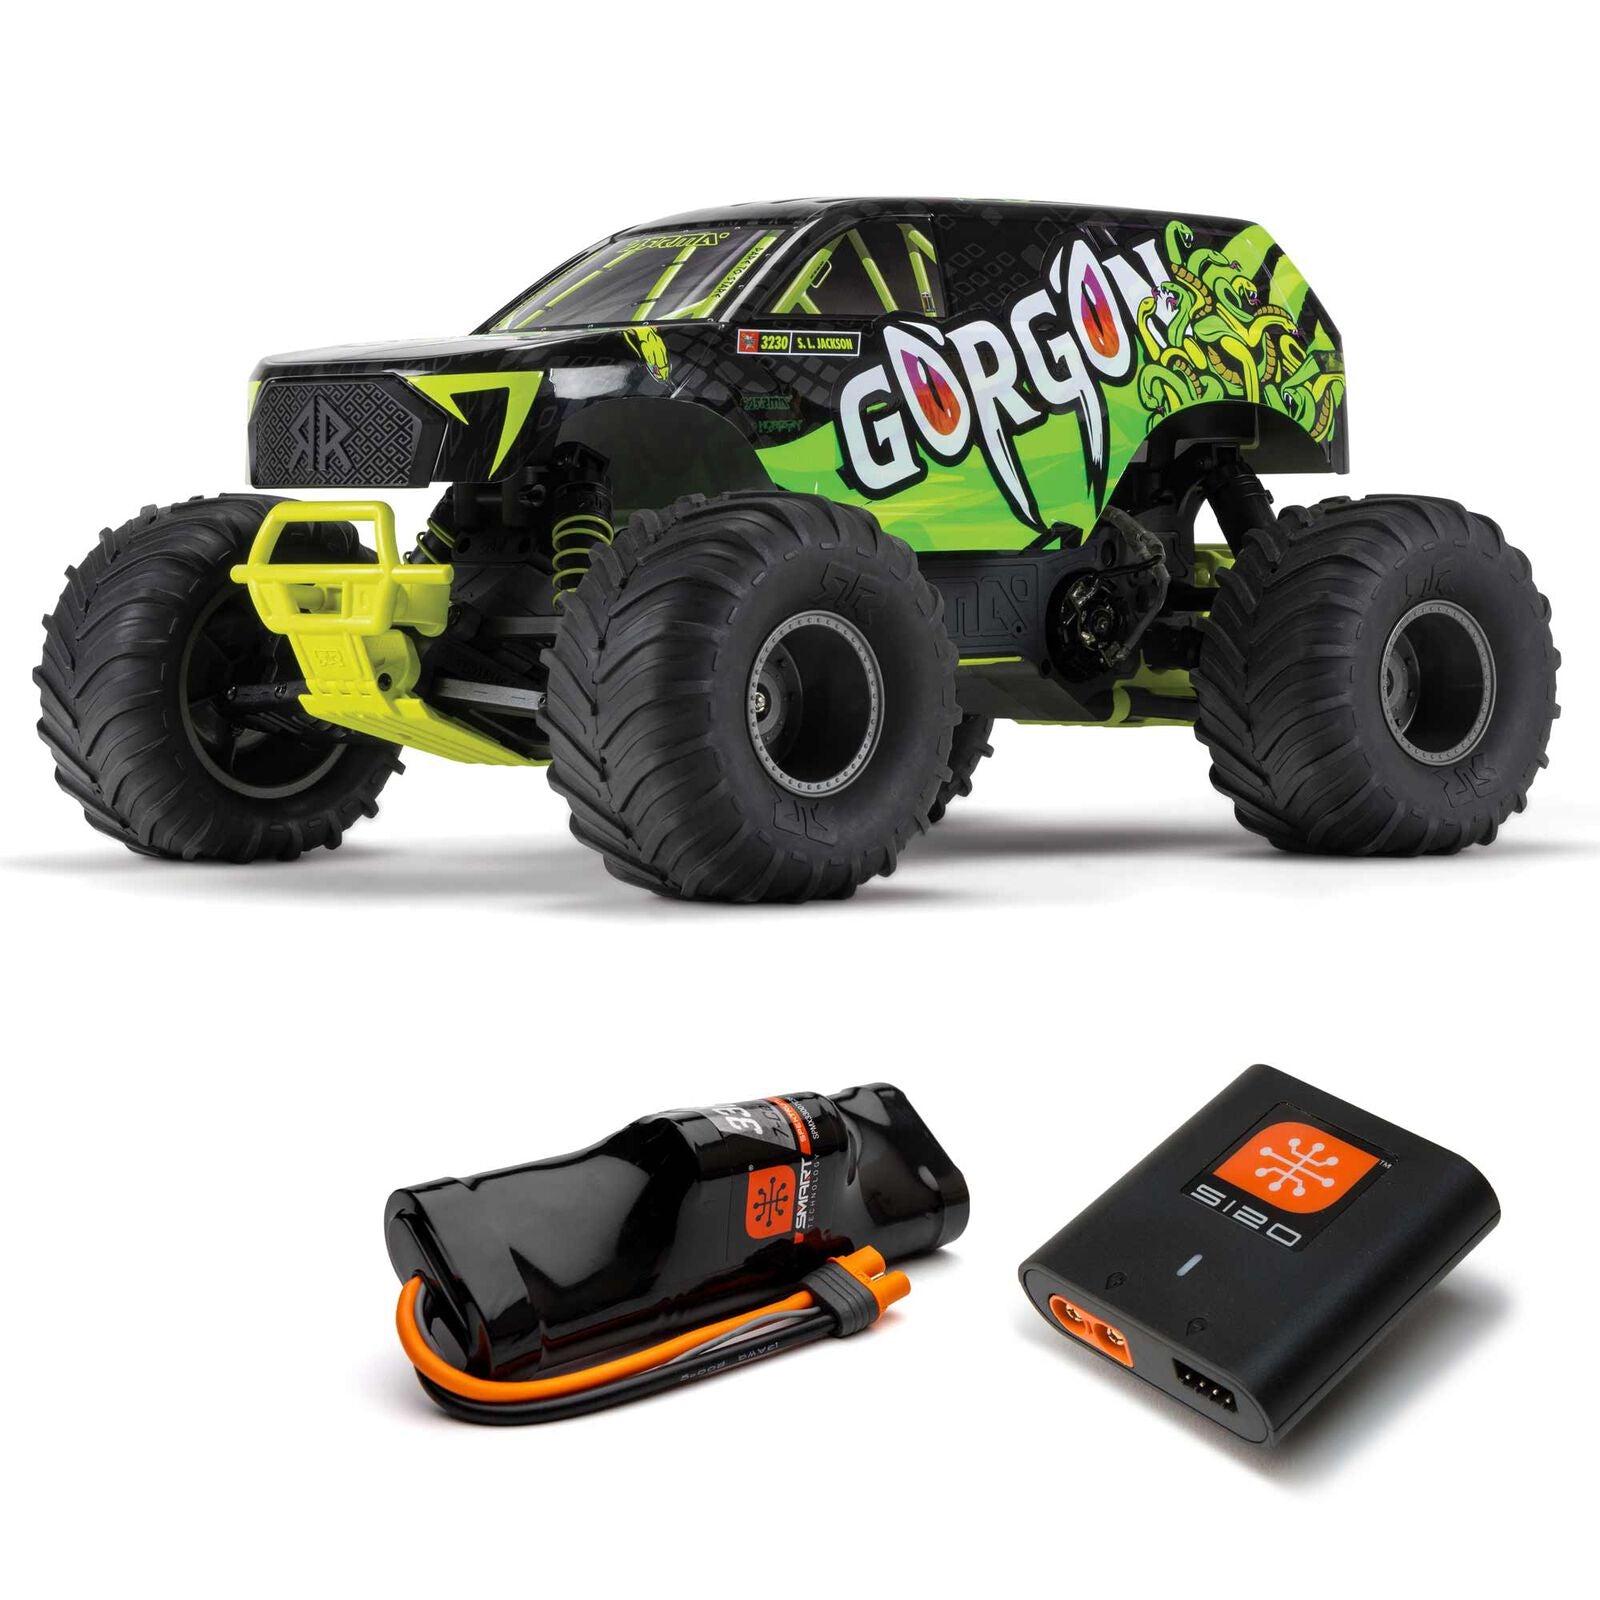 ARRMA ARA3230 1/10 GORGON 4X2 MEGA 550 Brushed Monster Truck RTR with Battery & Charger